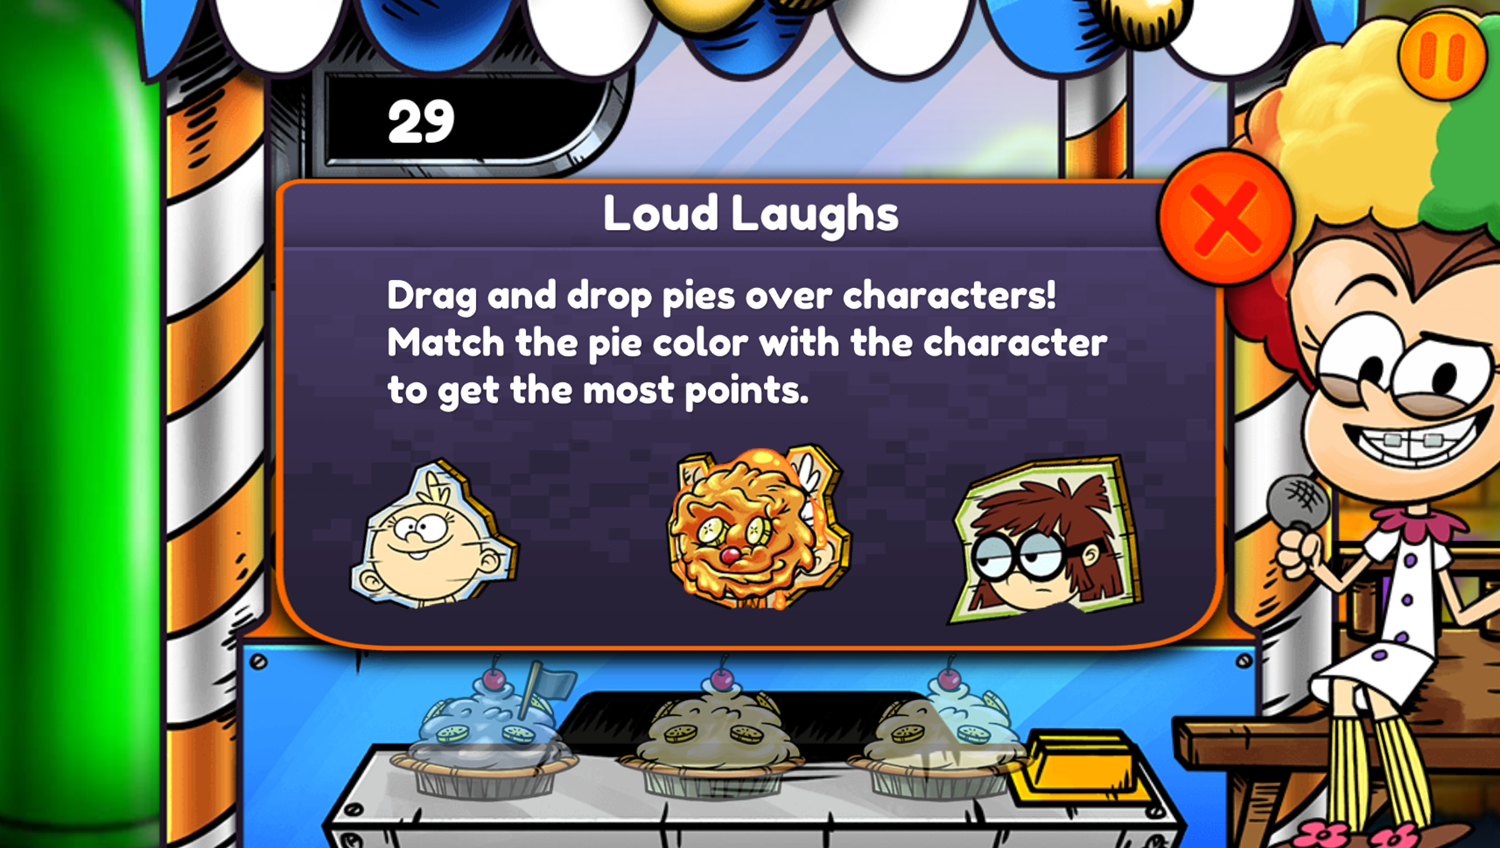 Nick Arcade Game Stage Select Loud Laughs How To Play Screenshot.